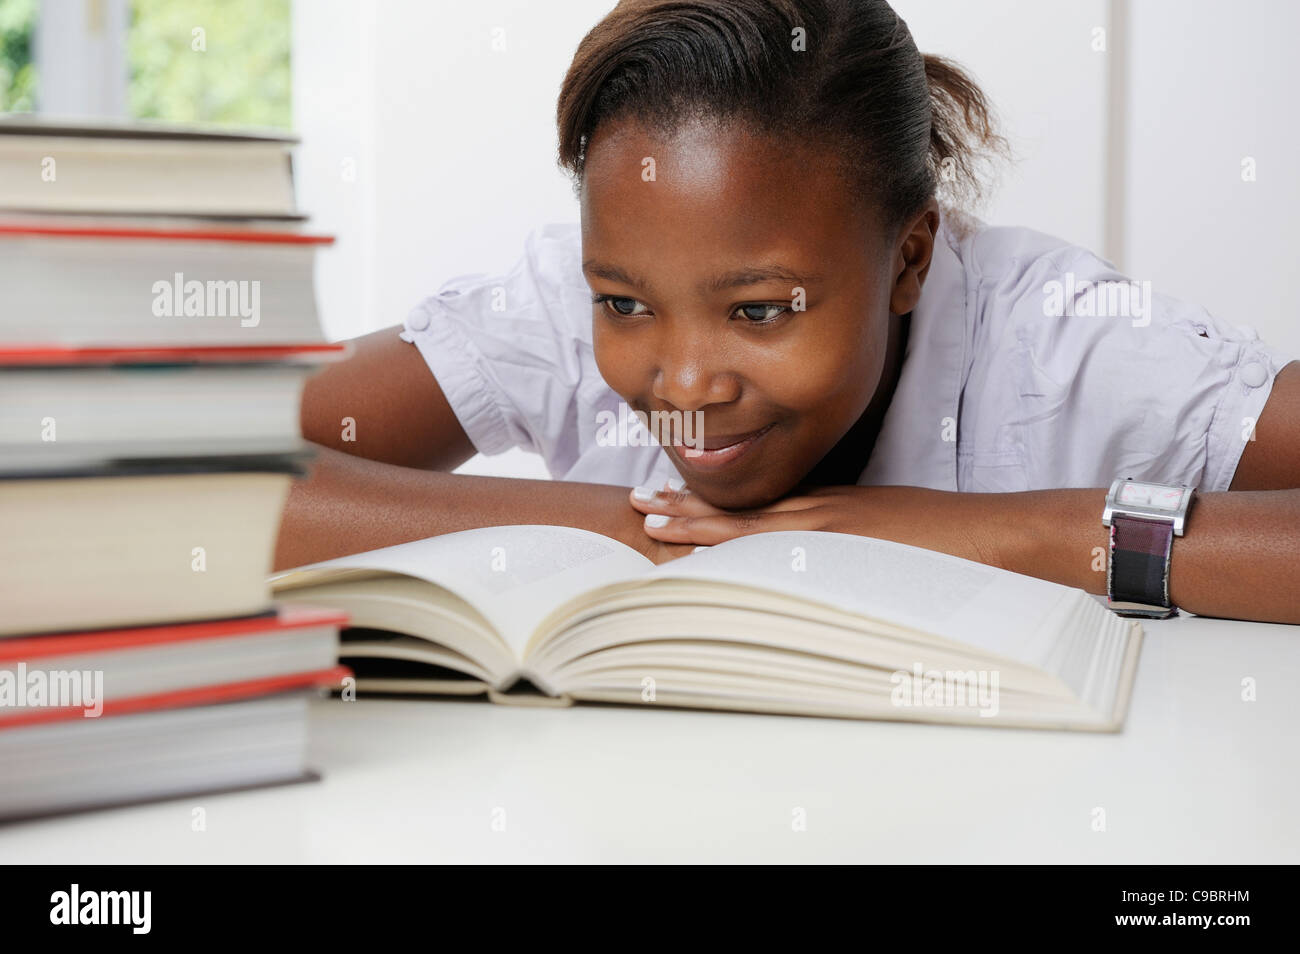 Female teenage student reading, with pile of books in front of her, Cape Town, Western Cape Province, South Africa Stock Photo